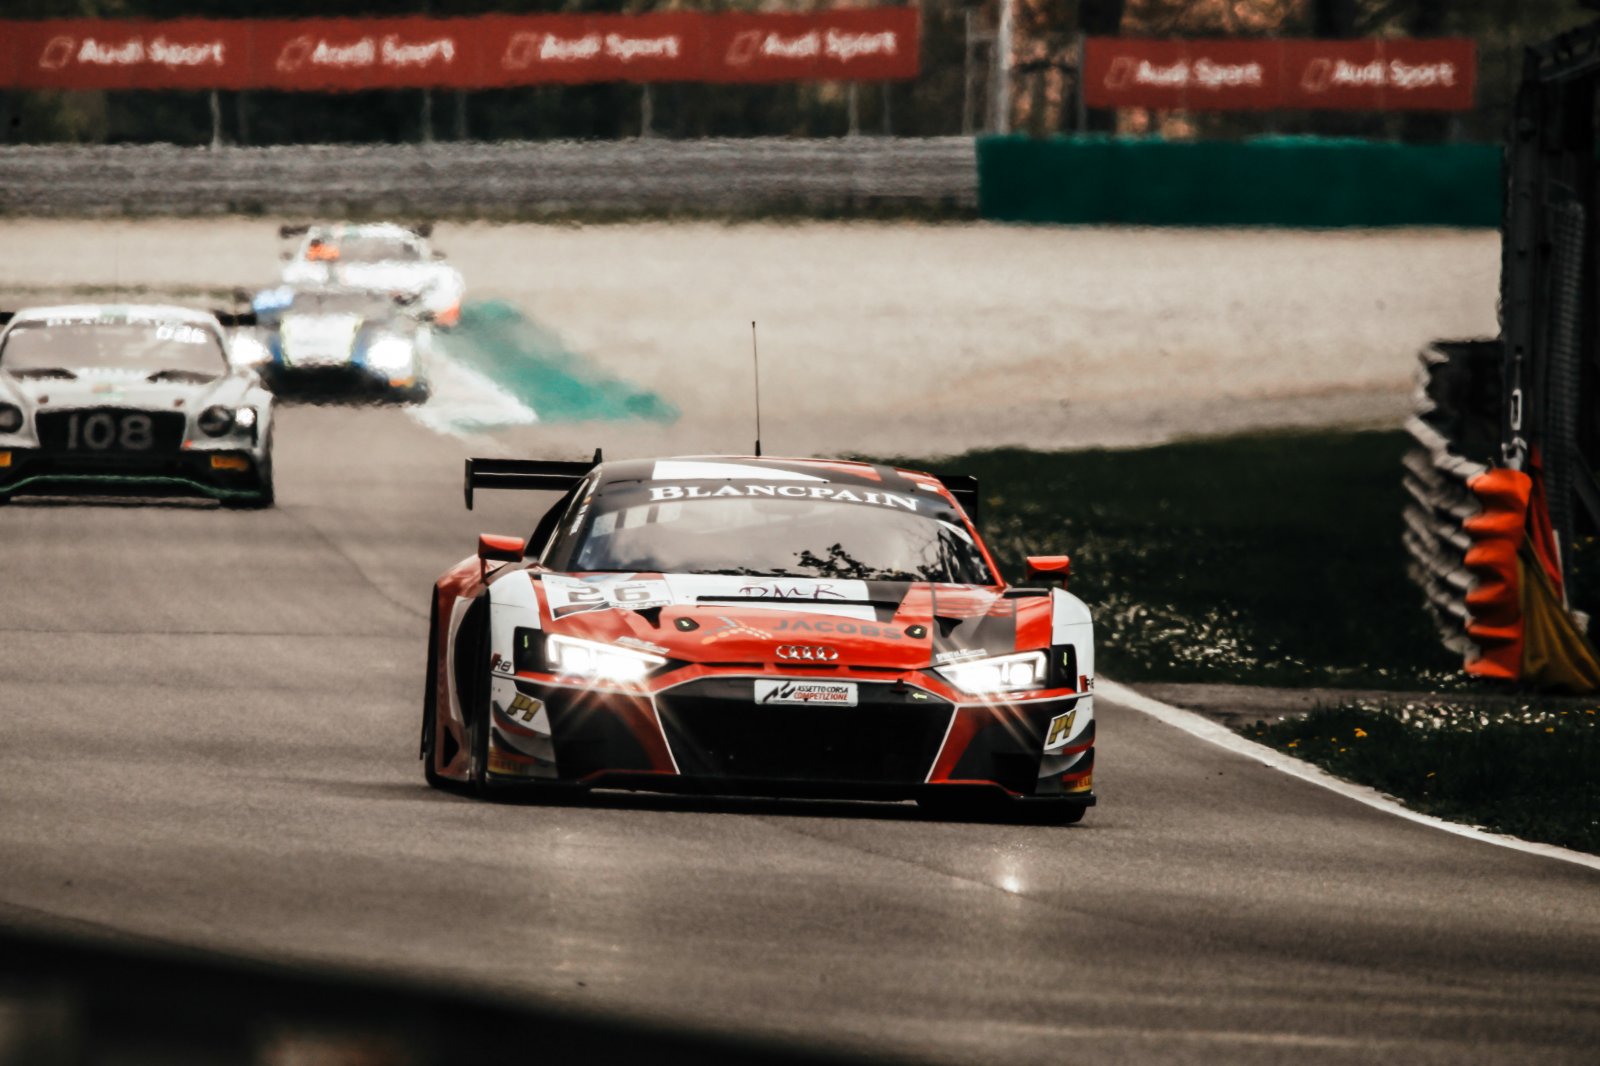 Sainteloc sticks with Audi for multi-car campaign in GT World Challenge Europe Powered by AWS